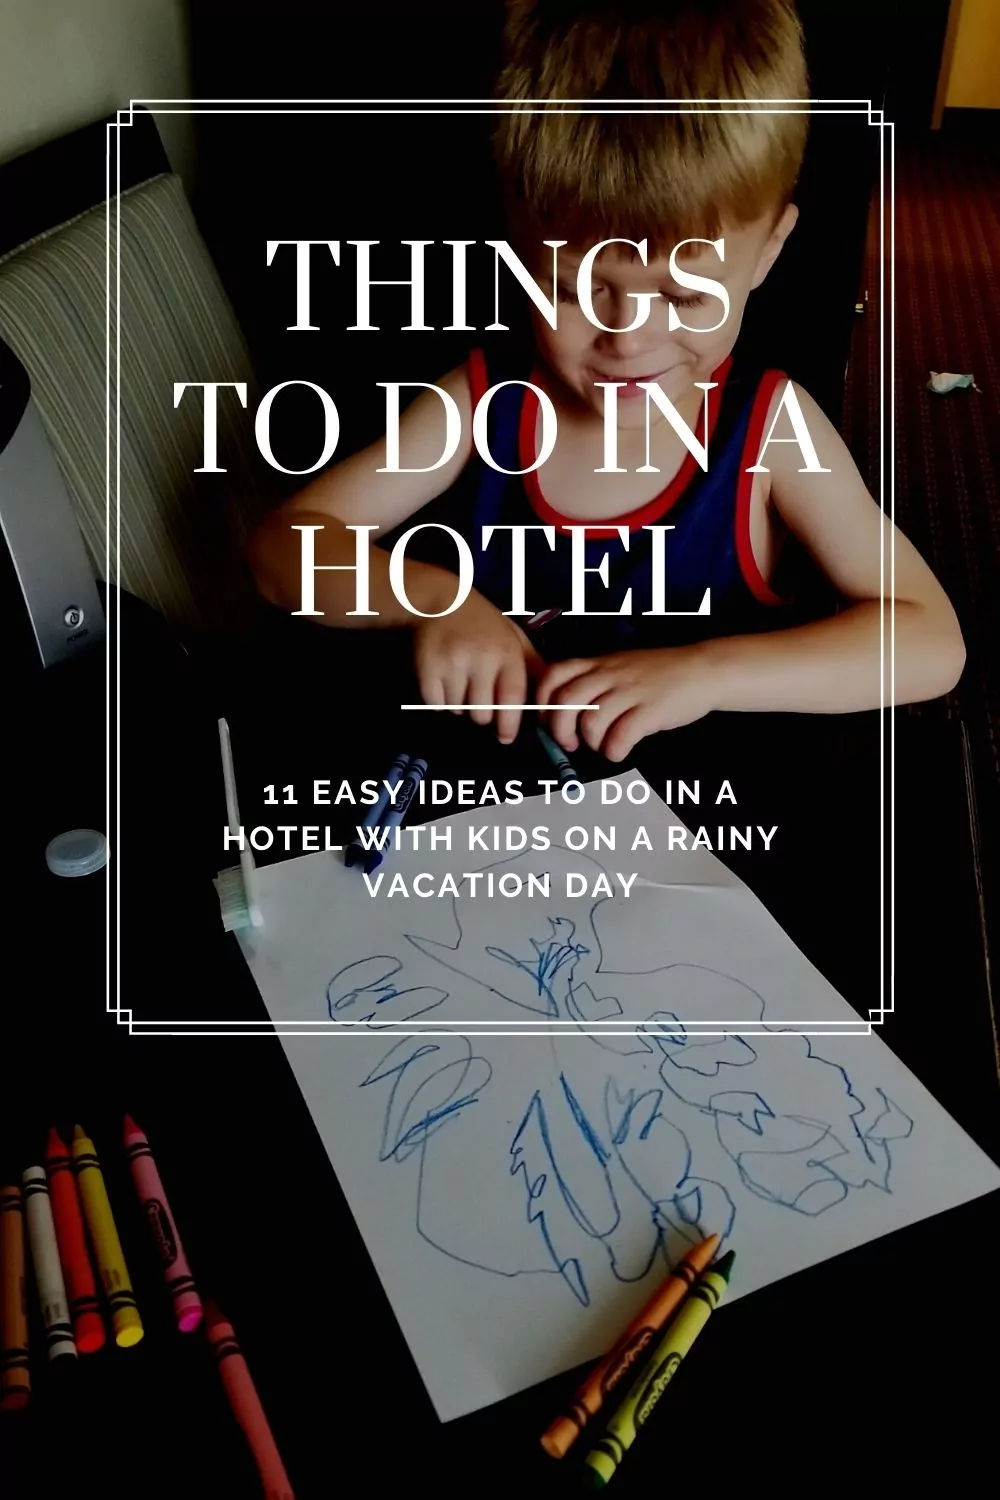 11 ideas to do in a hotel with kids on a rainy vacation day